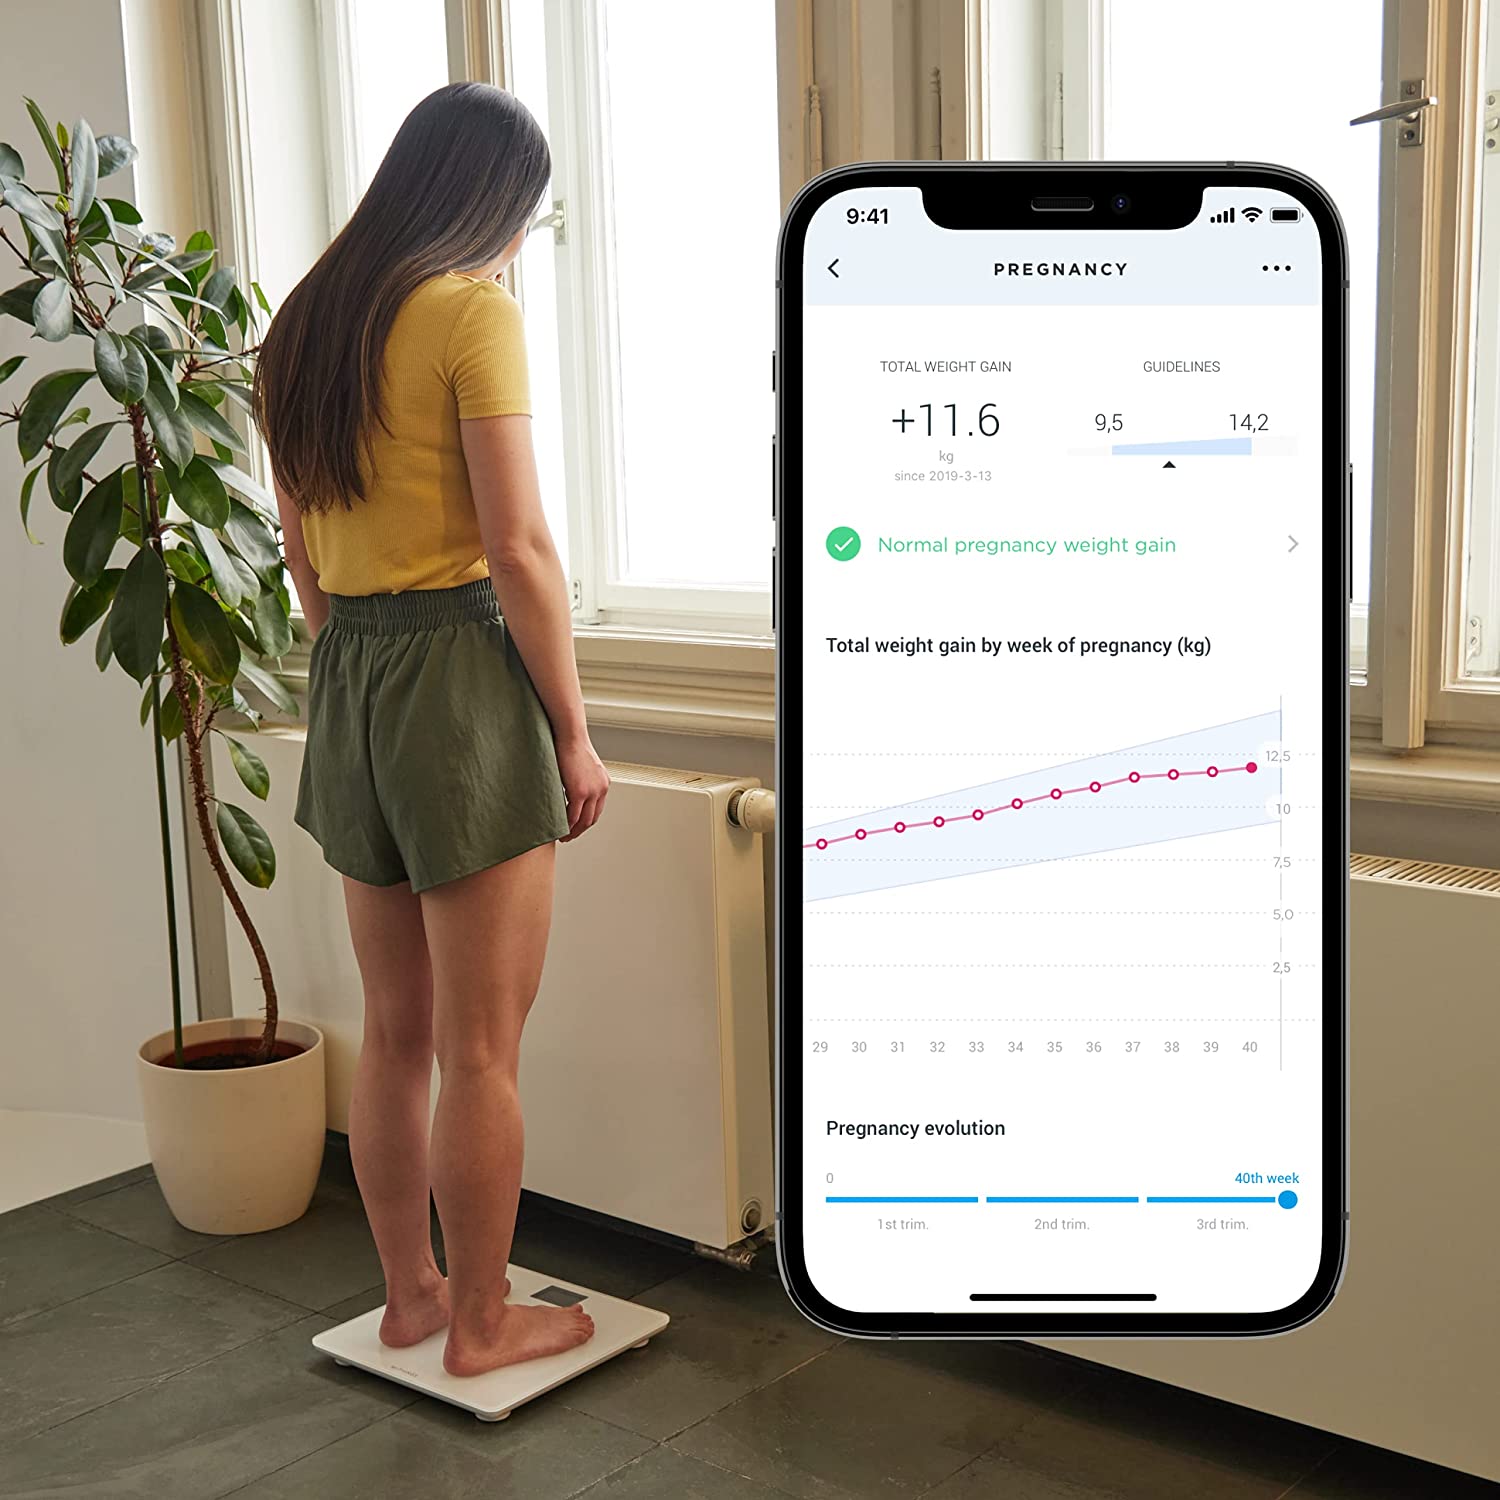 Withings - Body+ Body Composition Smart Wi-Fi Scale 